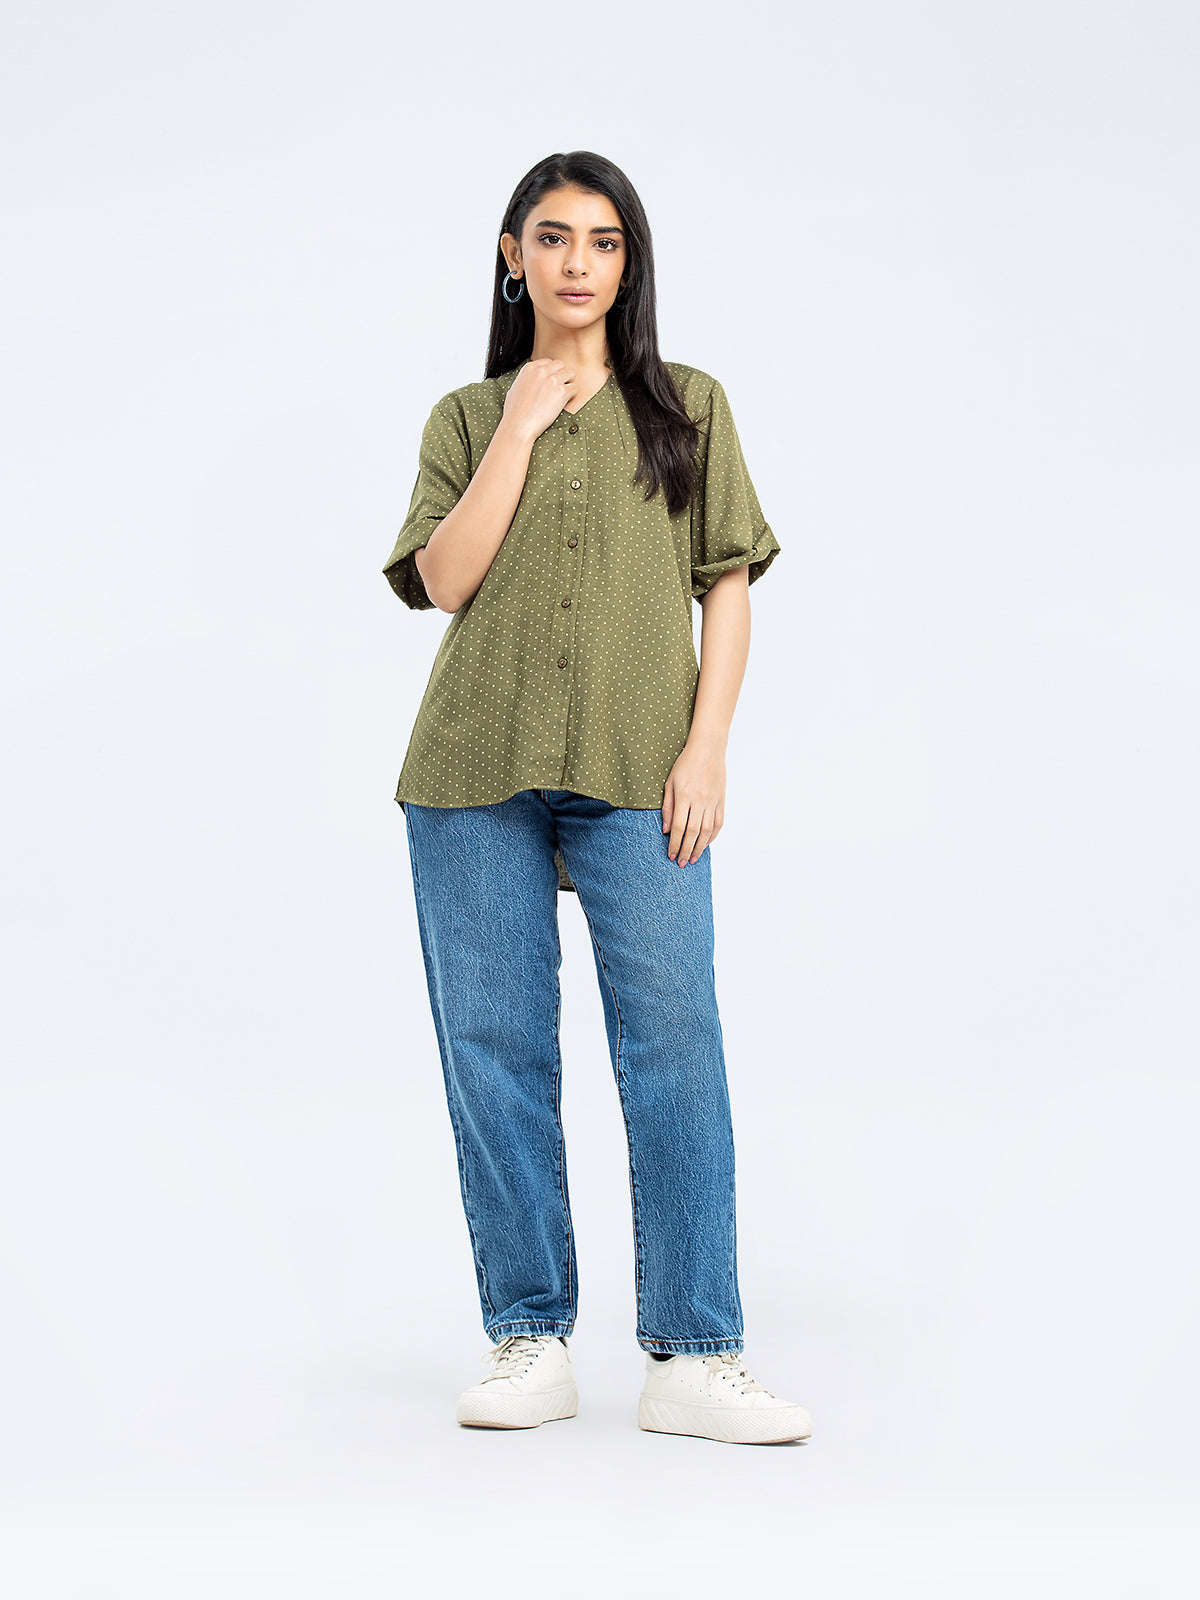 Relaxed Fit Button Down Shirt - FWTS23-149